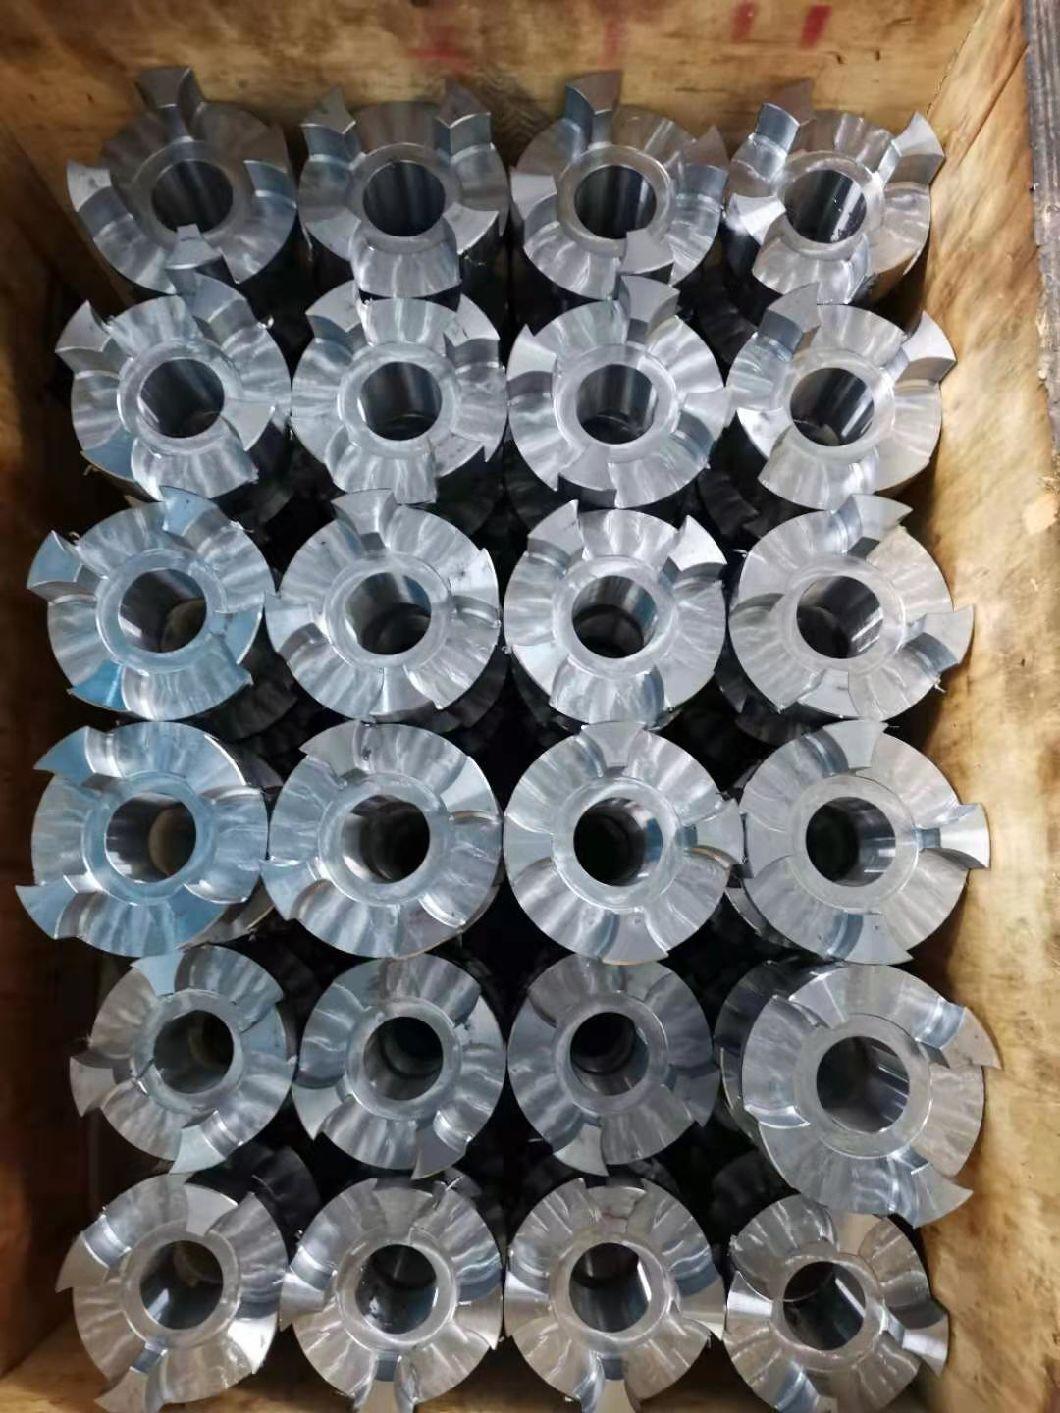 All Type Flexible Jaw Coupling L090 Coupler Gegr24 Coupling Nomex97 Couplings and HRC110 Coupling